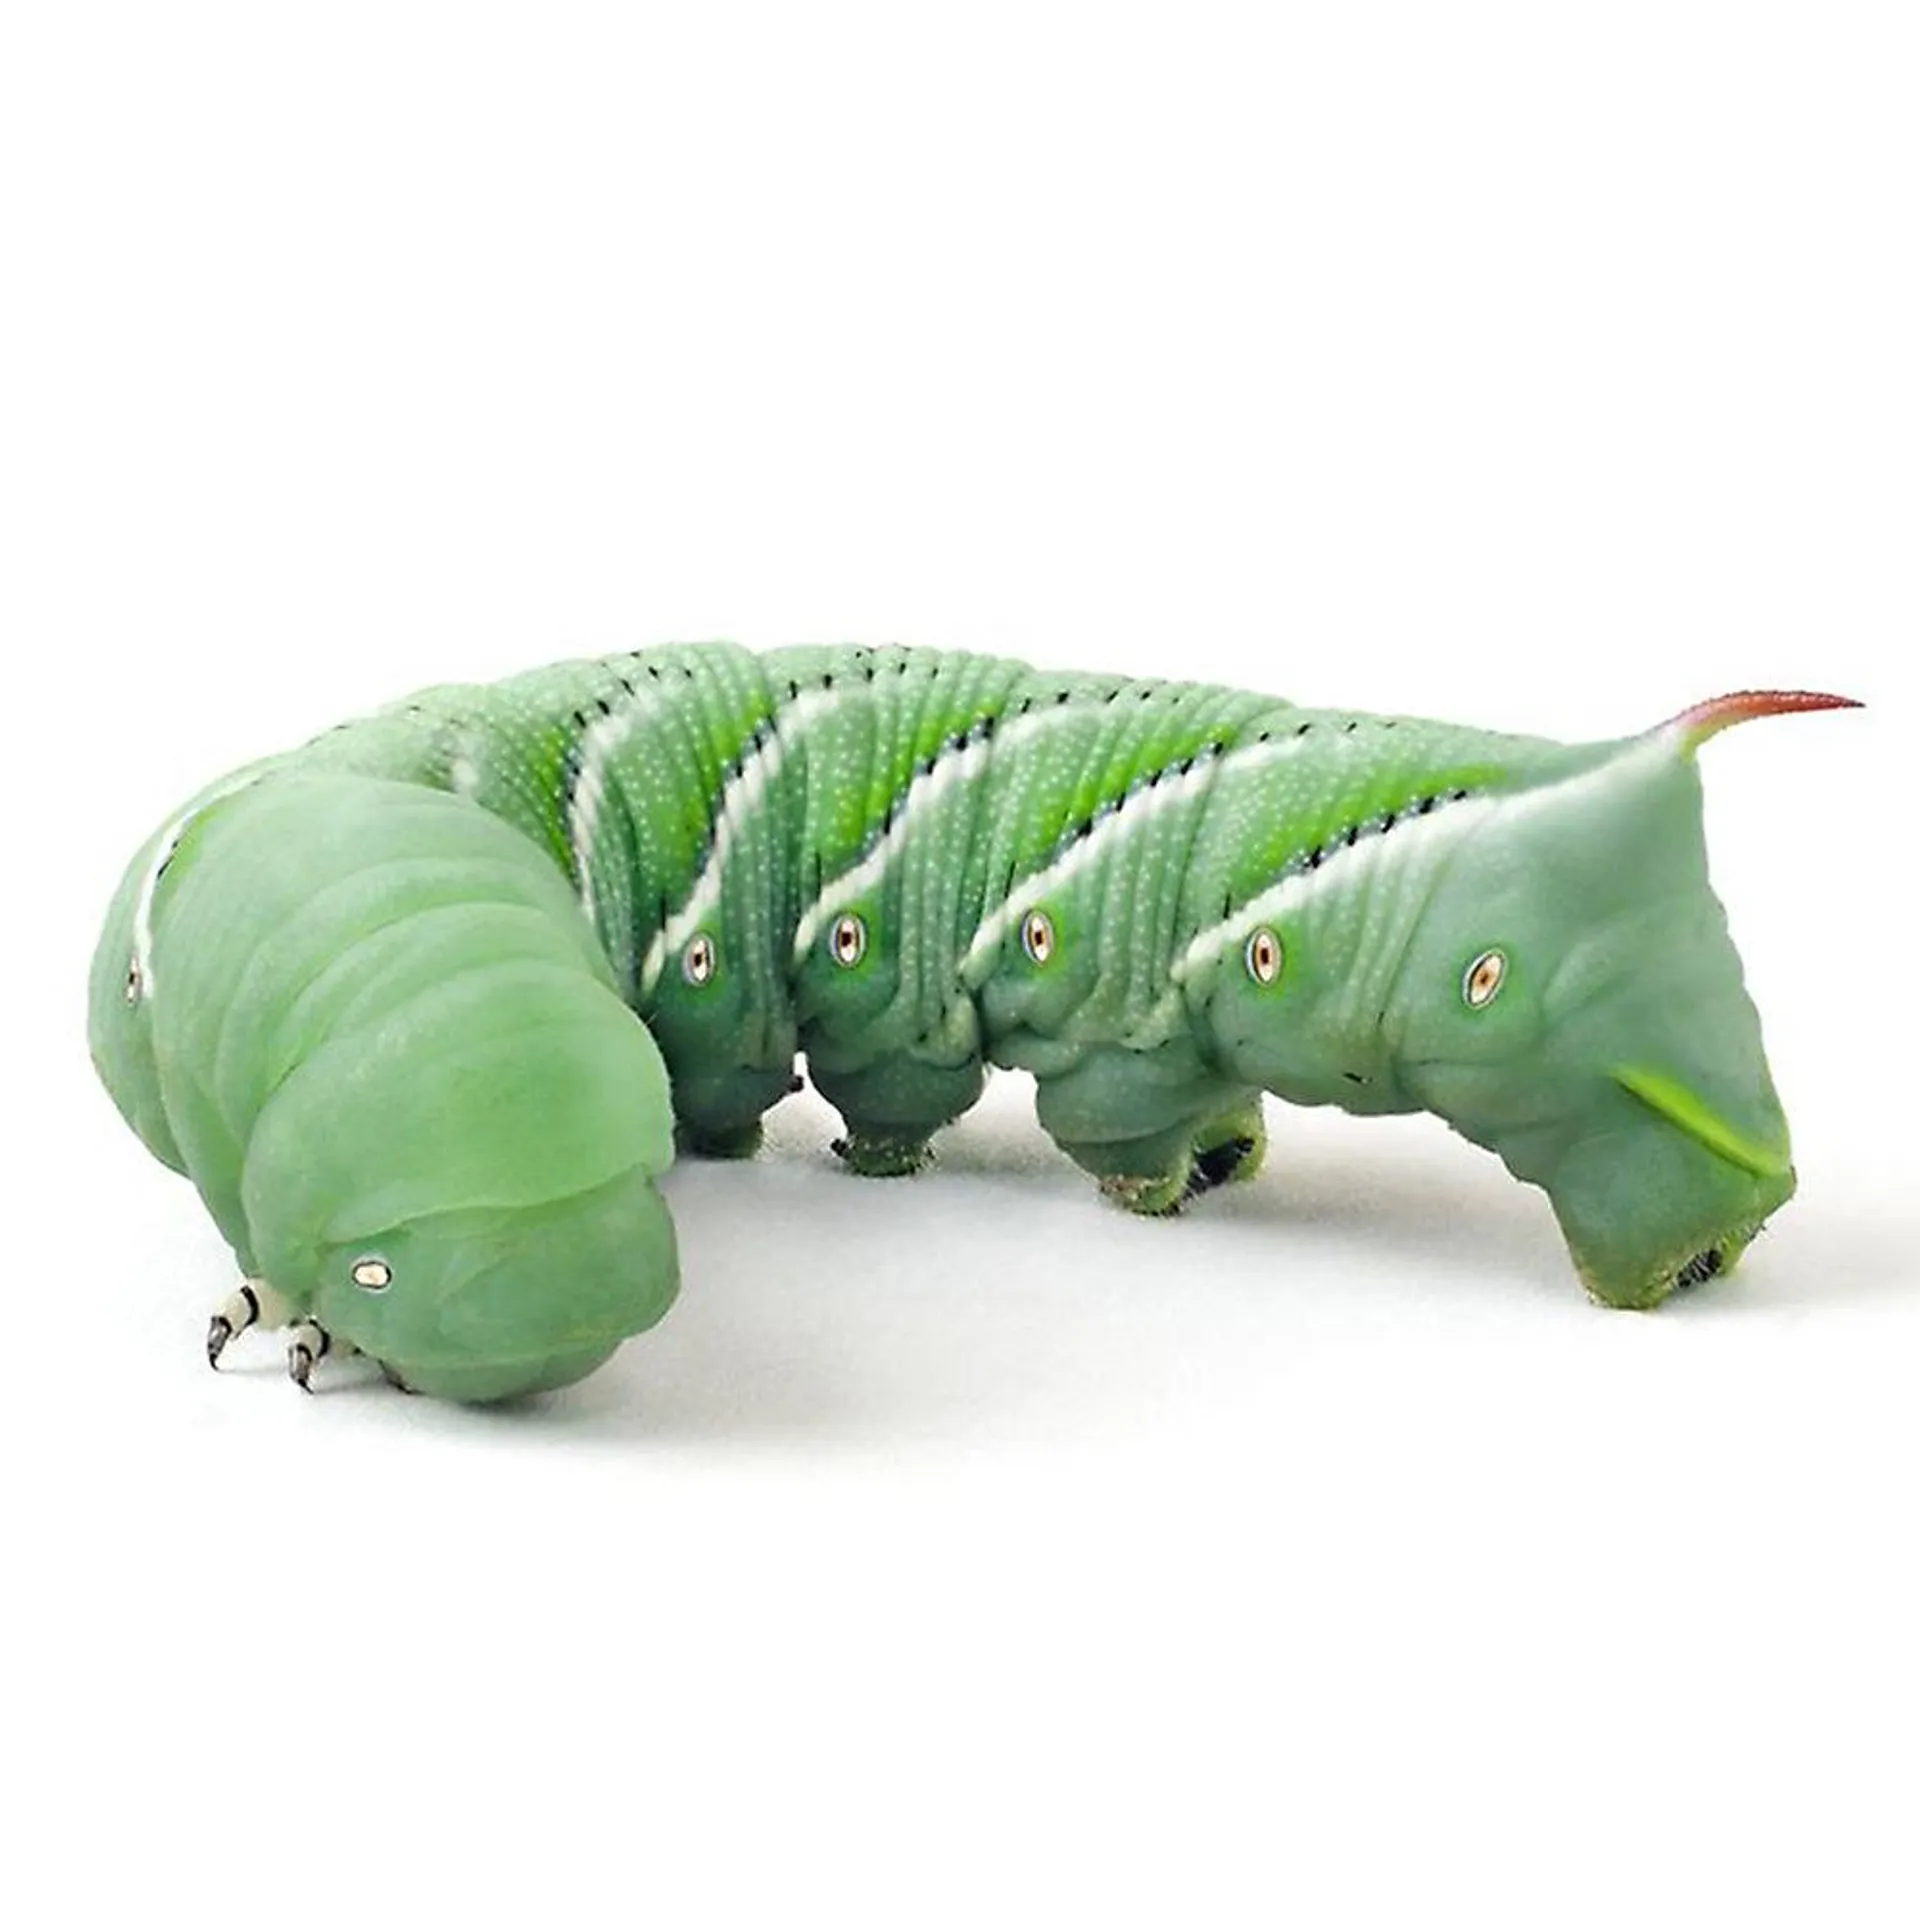 Live Hornworms - 4 Count Cup